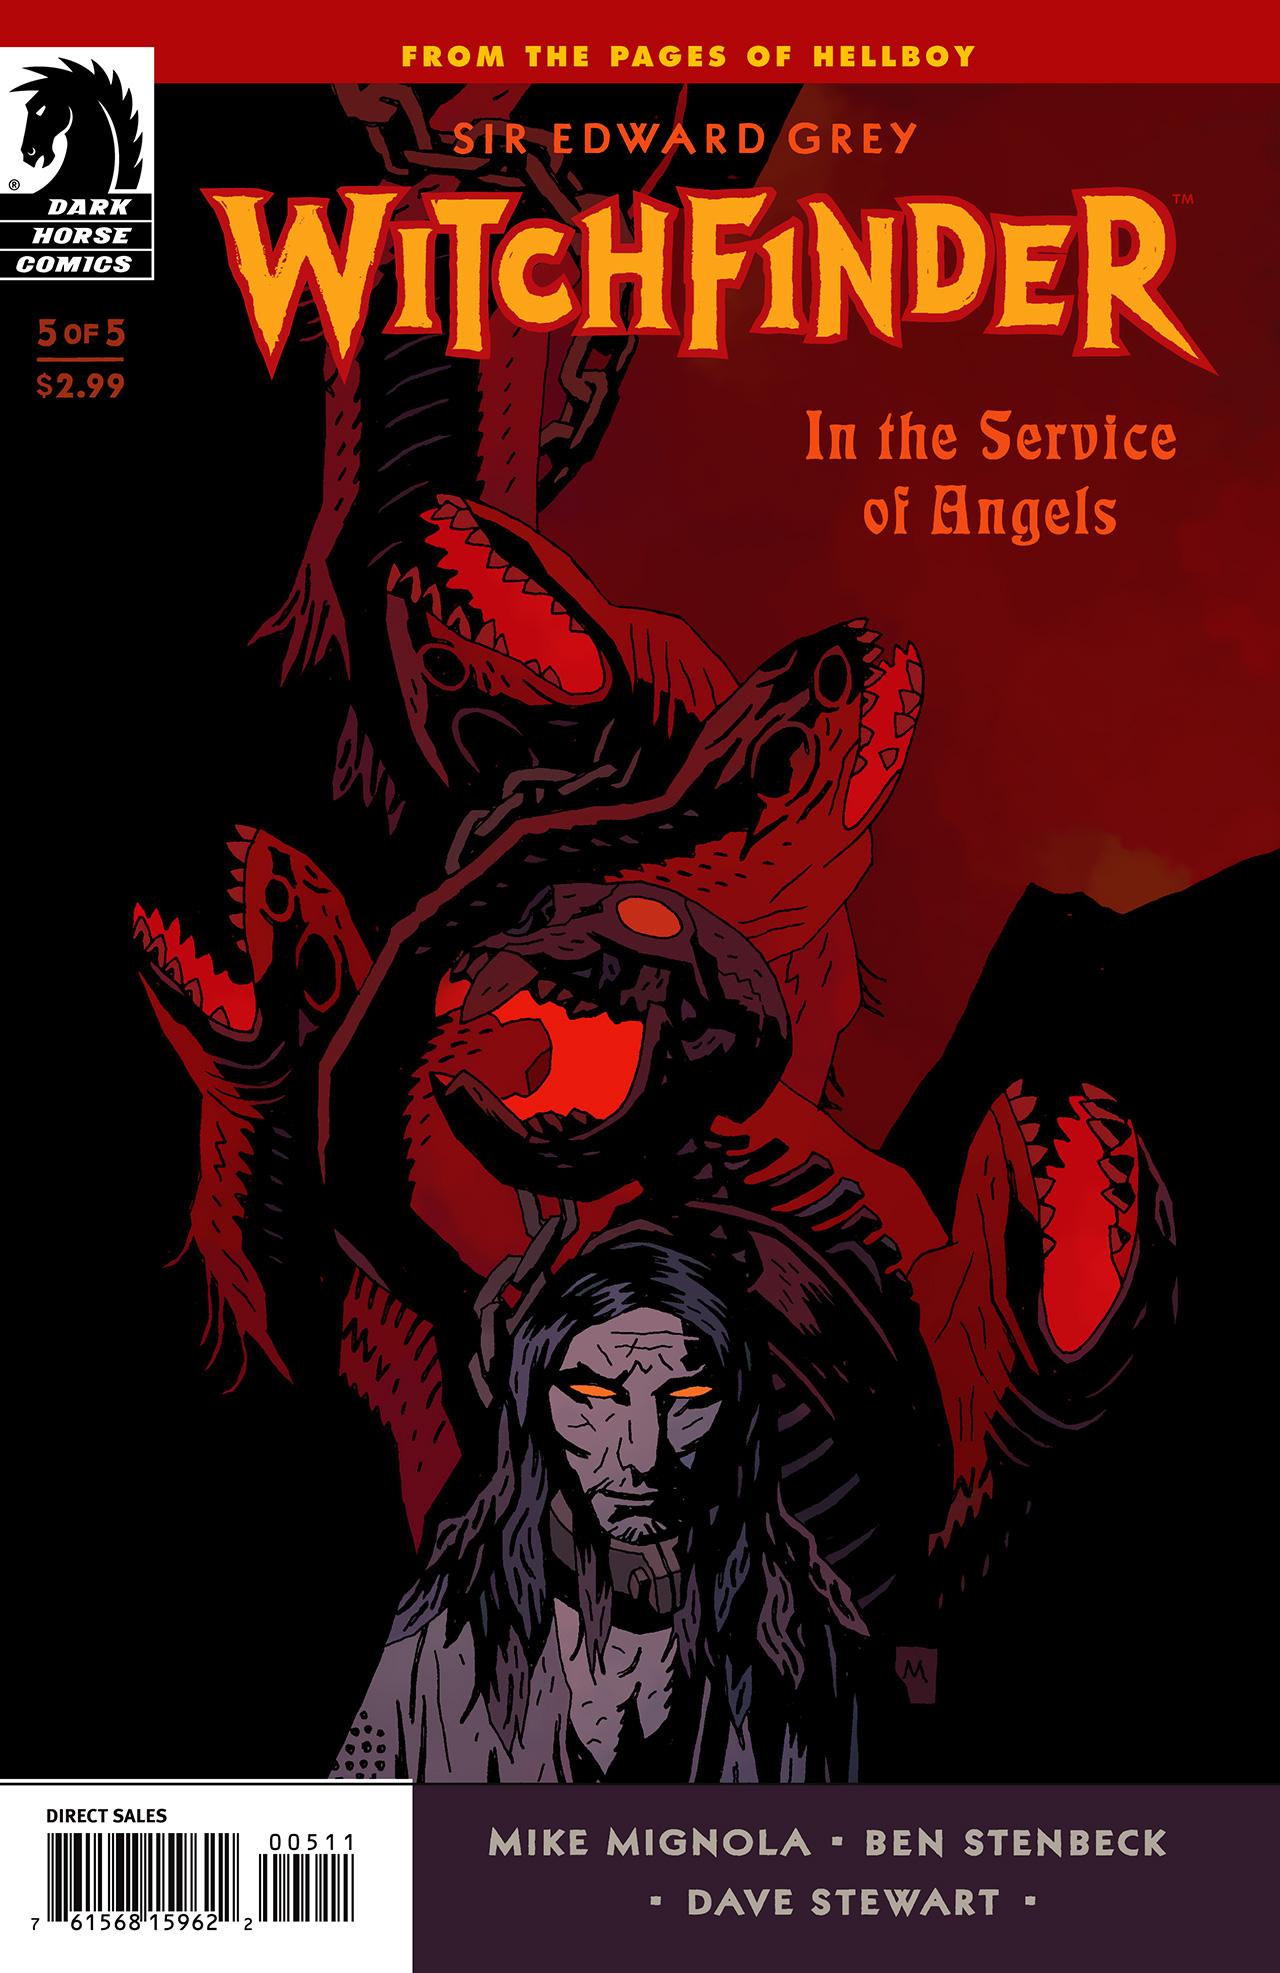 Sir Edward Grey Witchfinder: In the Service of Angels Vol. 1 #5